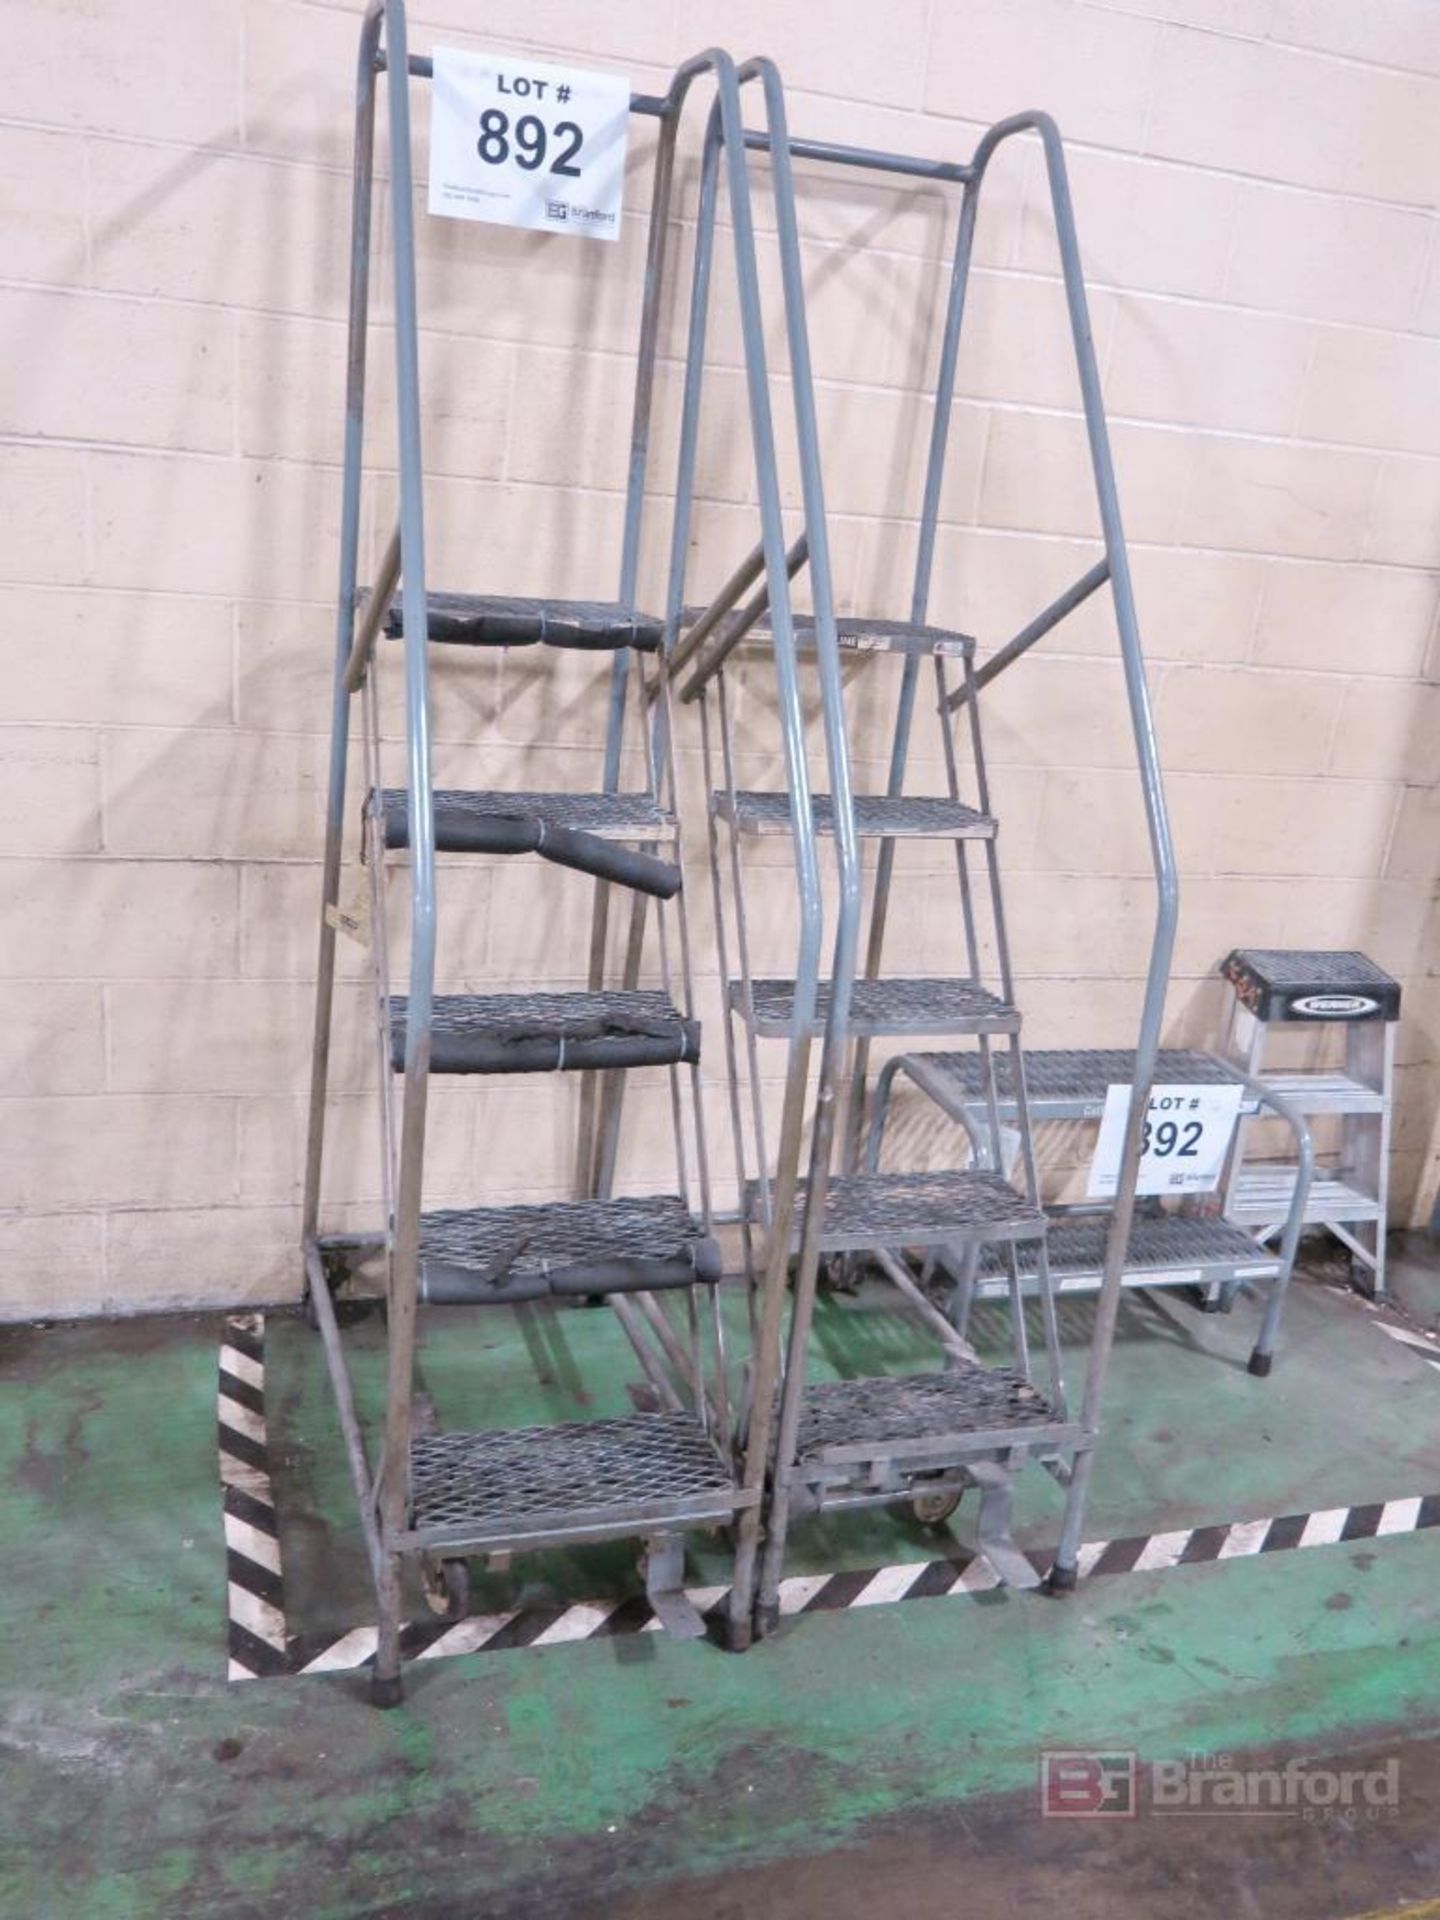 Assorted Ladders/Stool